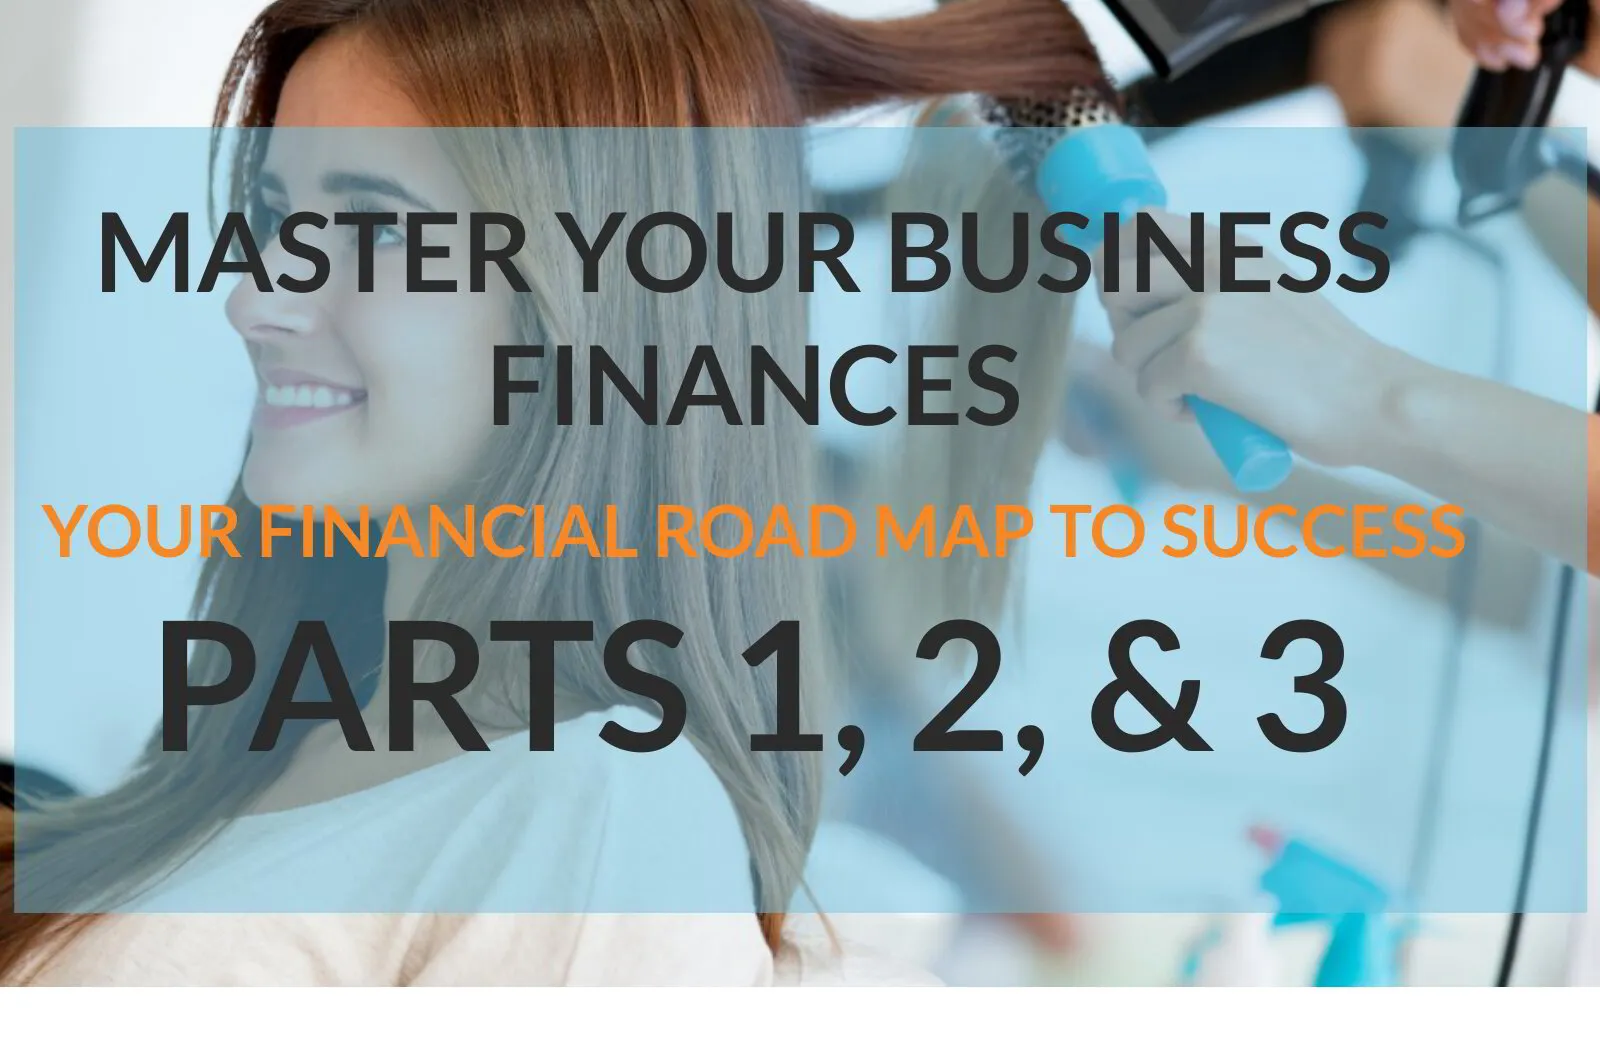 Bundle Package - Master Your Business Finances: Your Financial Road Map To Success Parts 1 - 3